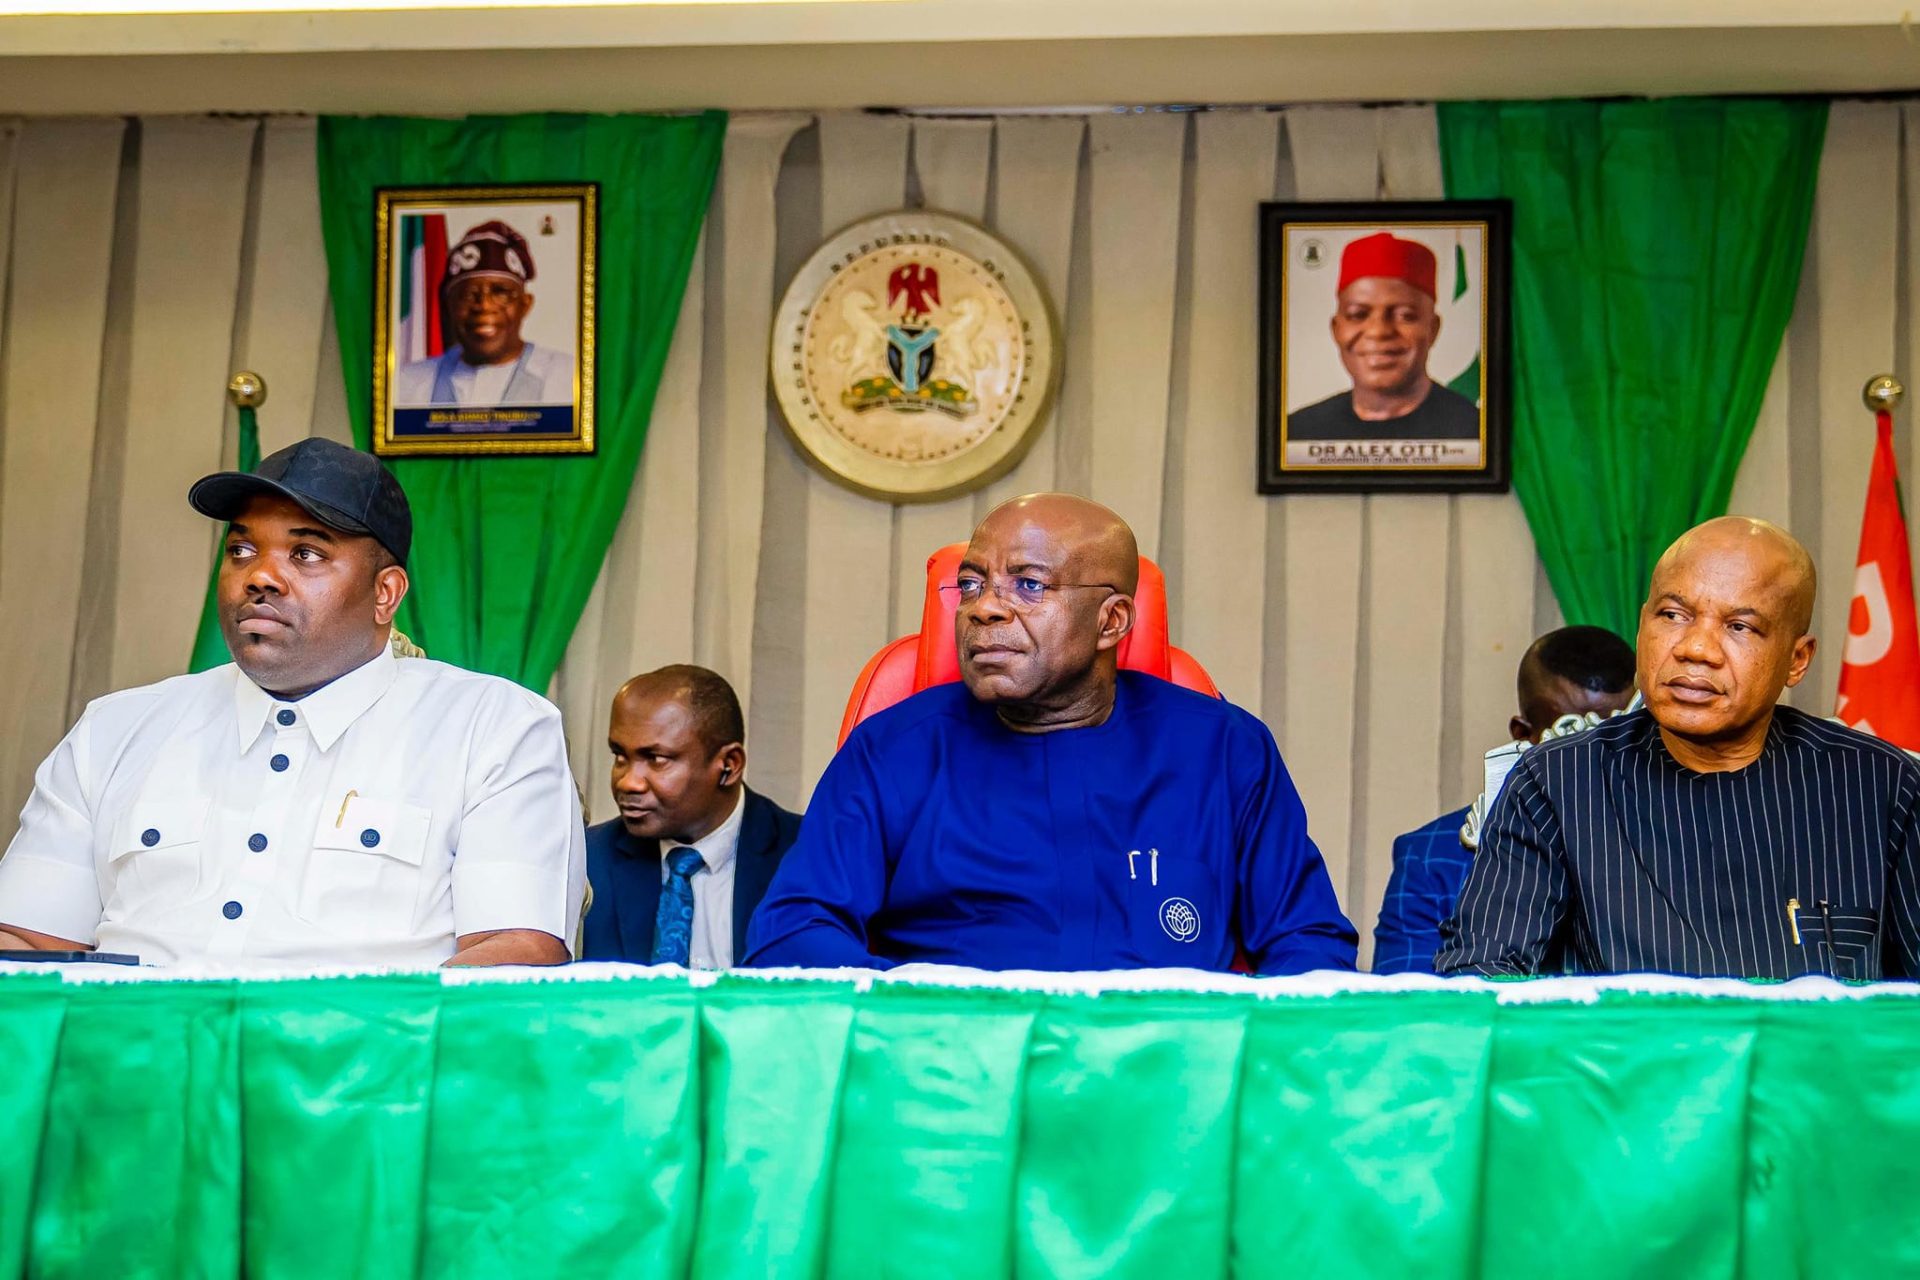 Governor Otti with the Deputy Governor, Ikechukwu Emetu (left) and Secretary to the State Government, Prof. Kenneth Kalu (right) at the inauguration.